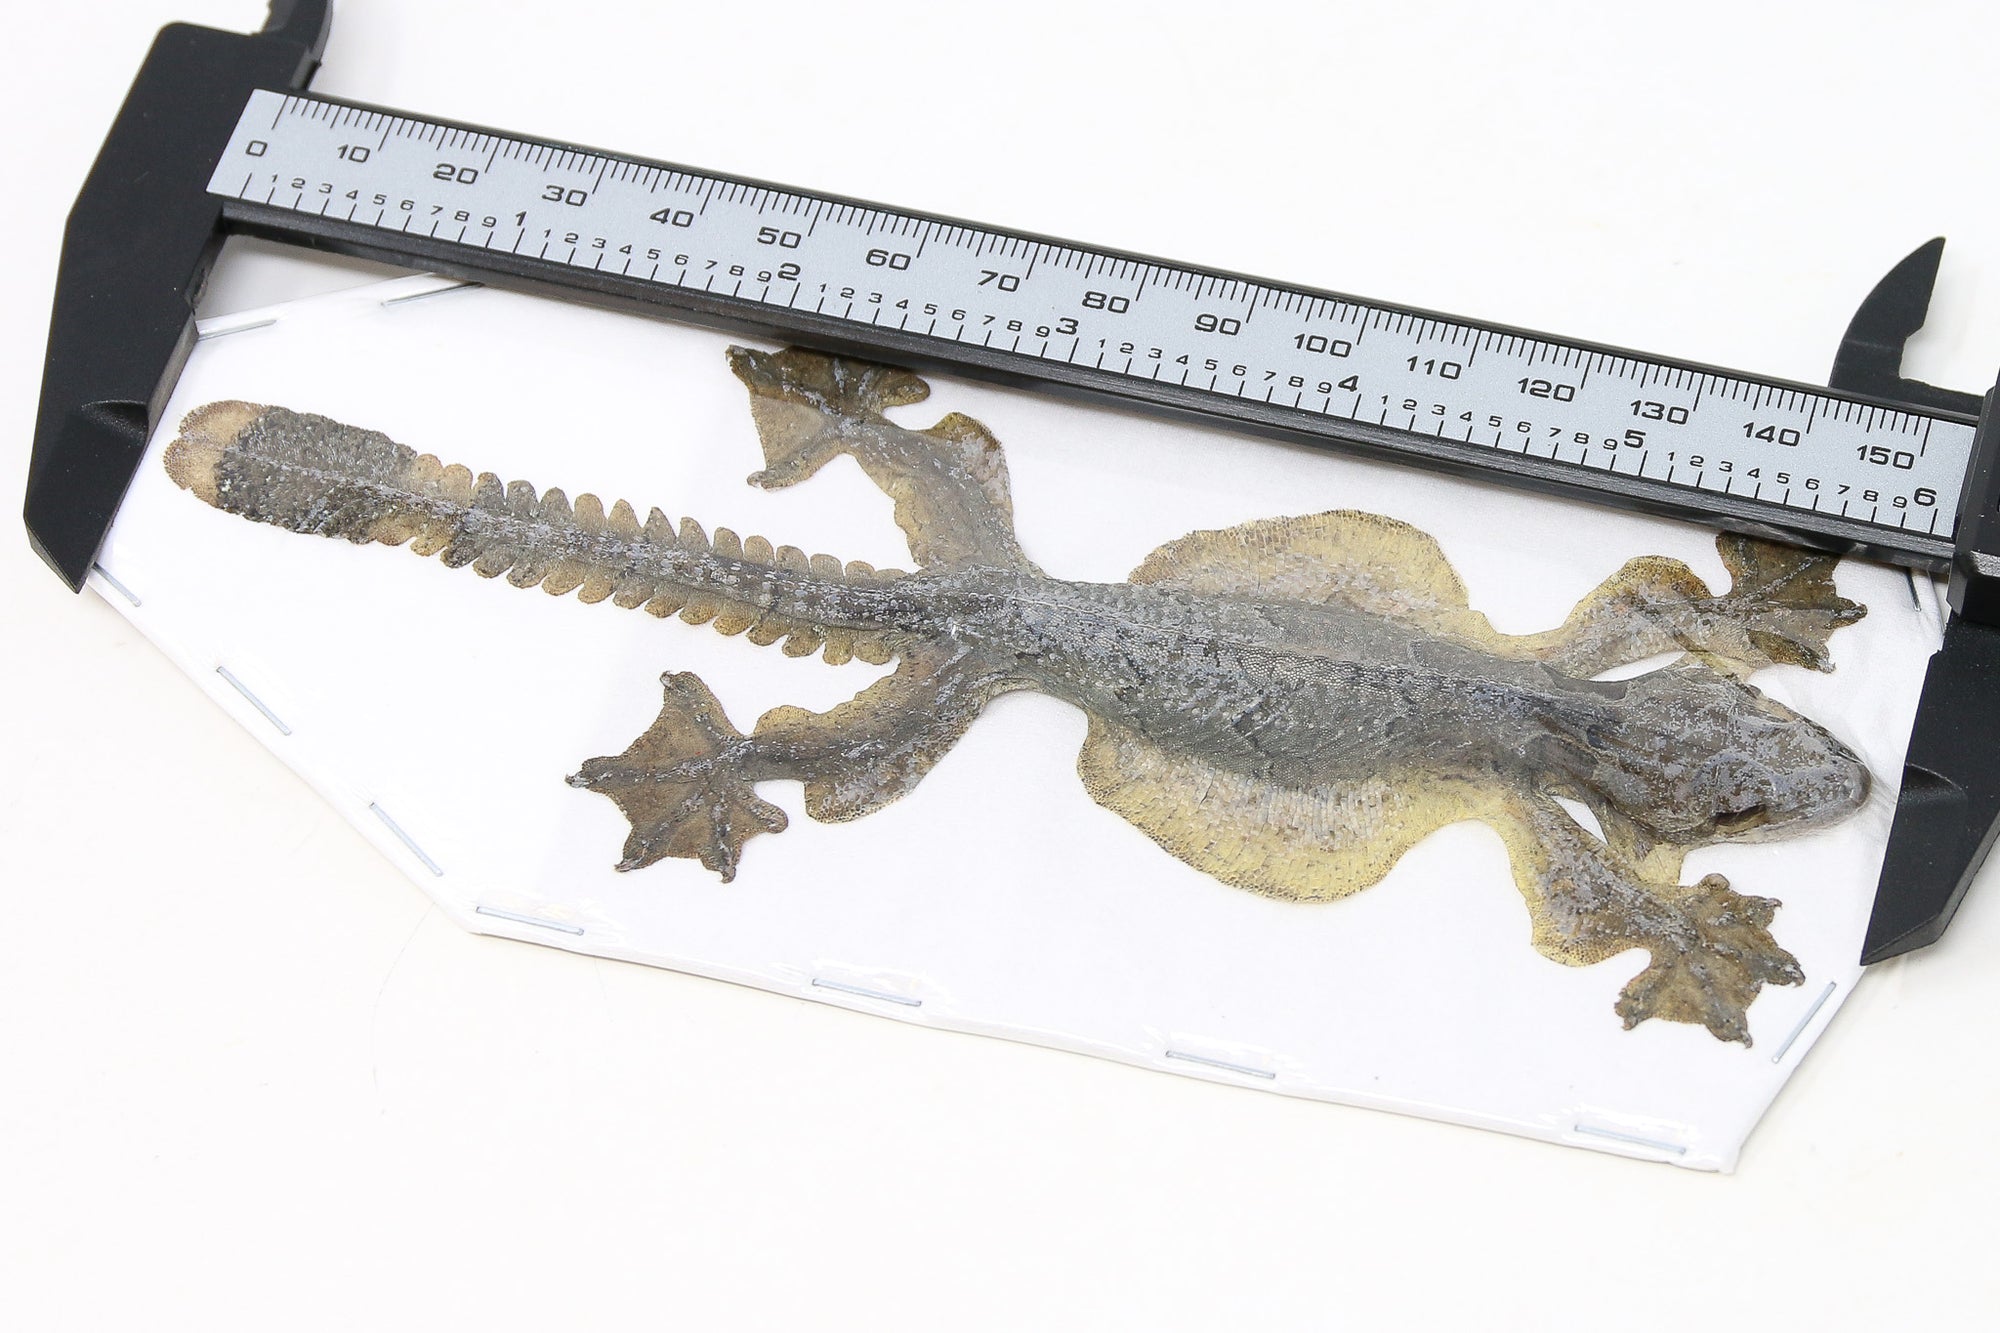 Kuhl's Flying Gecko | Ptychozoon kuhli | Dry-preserved spread specimens for framing, collecting, studying